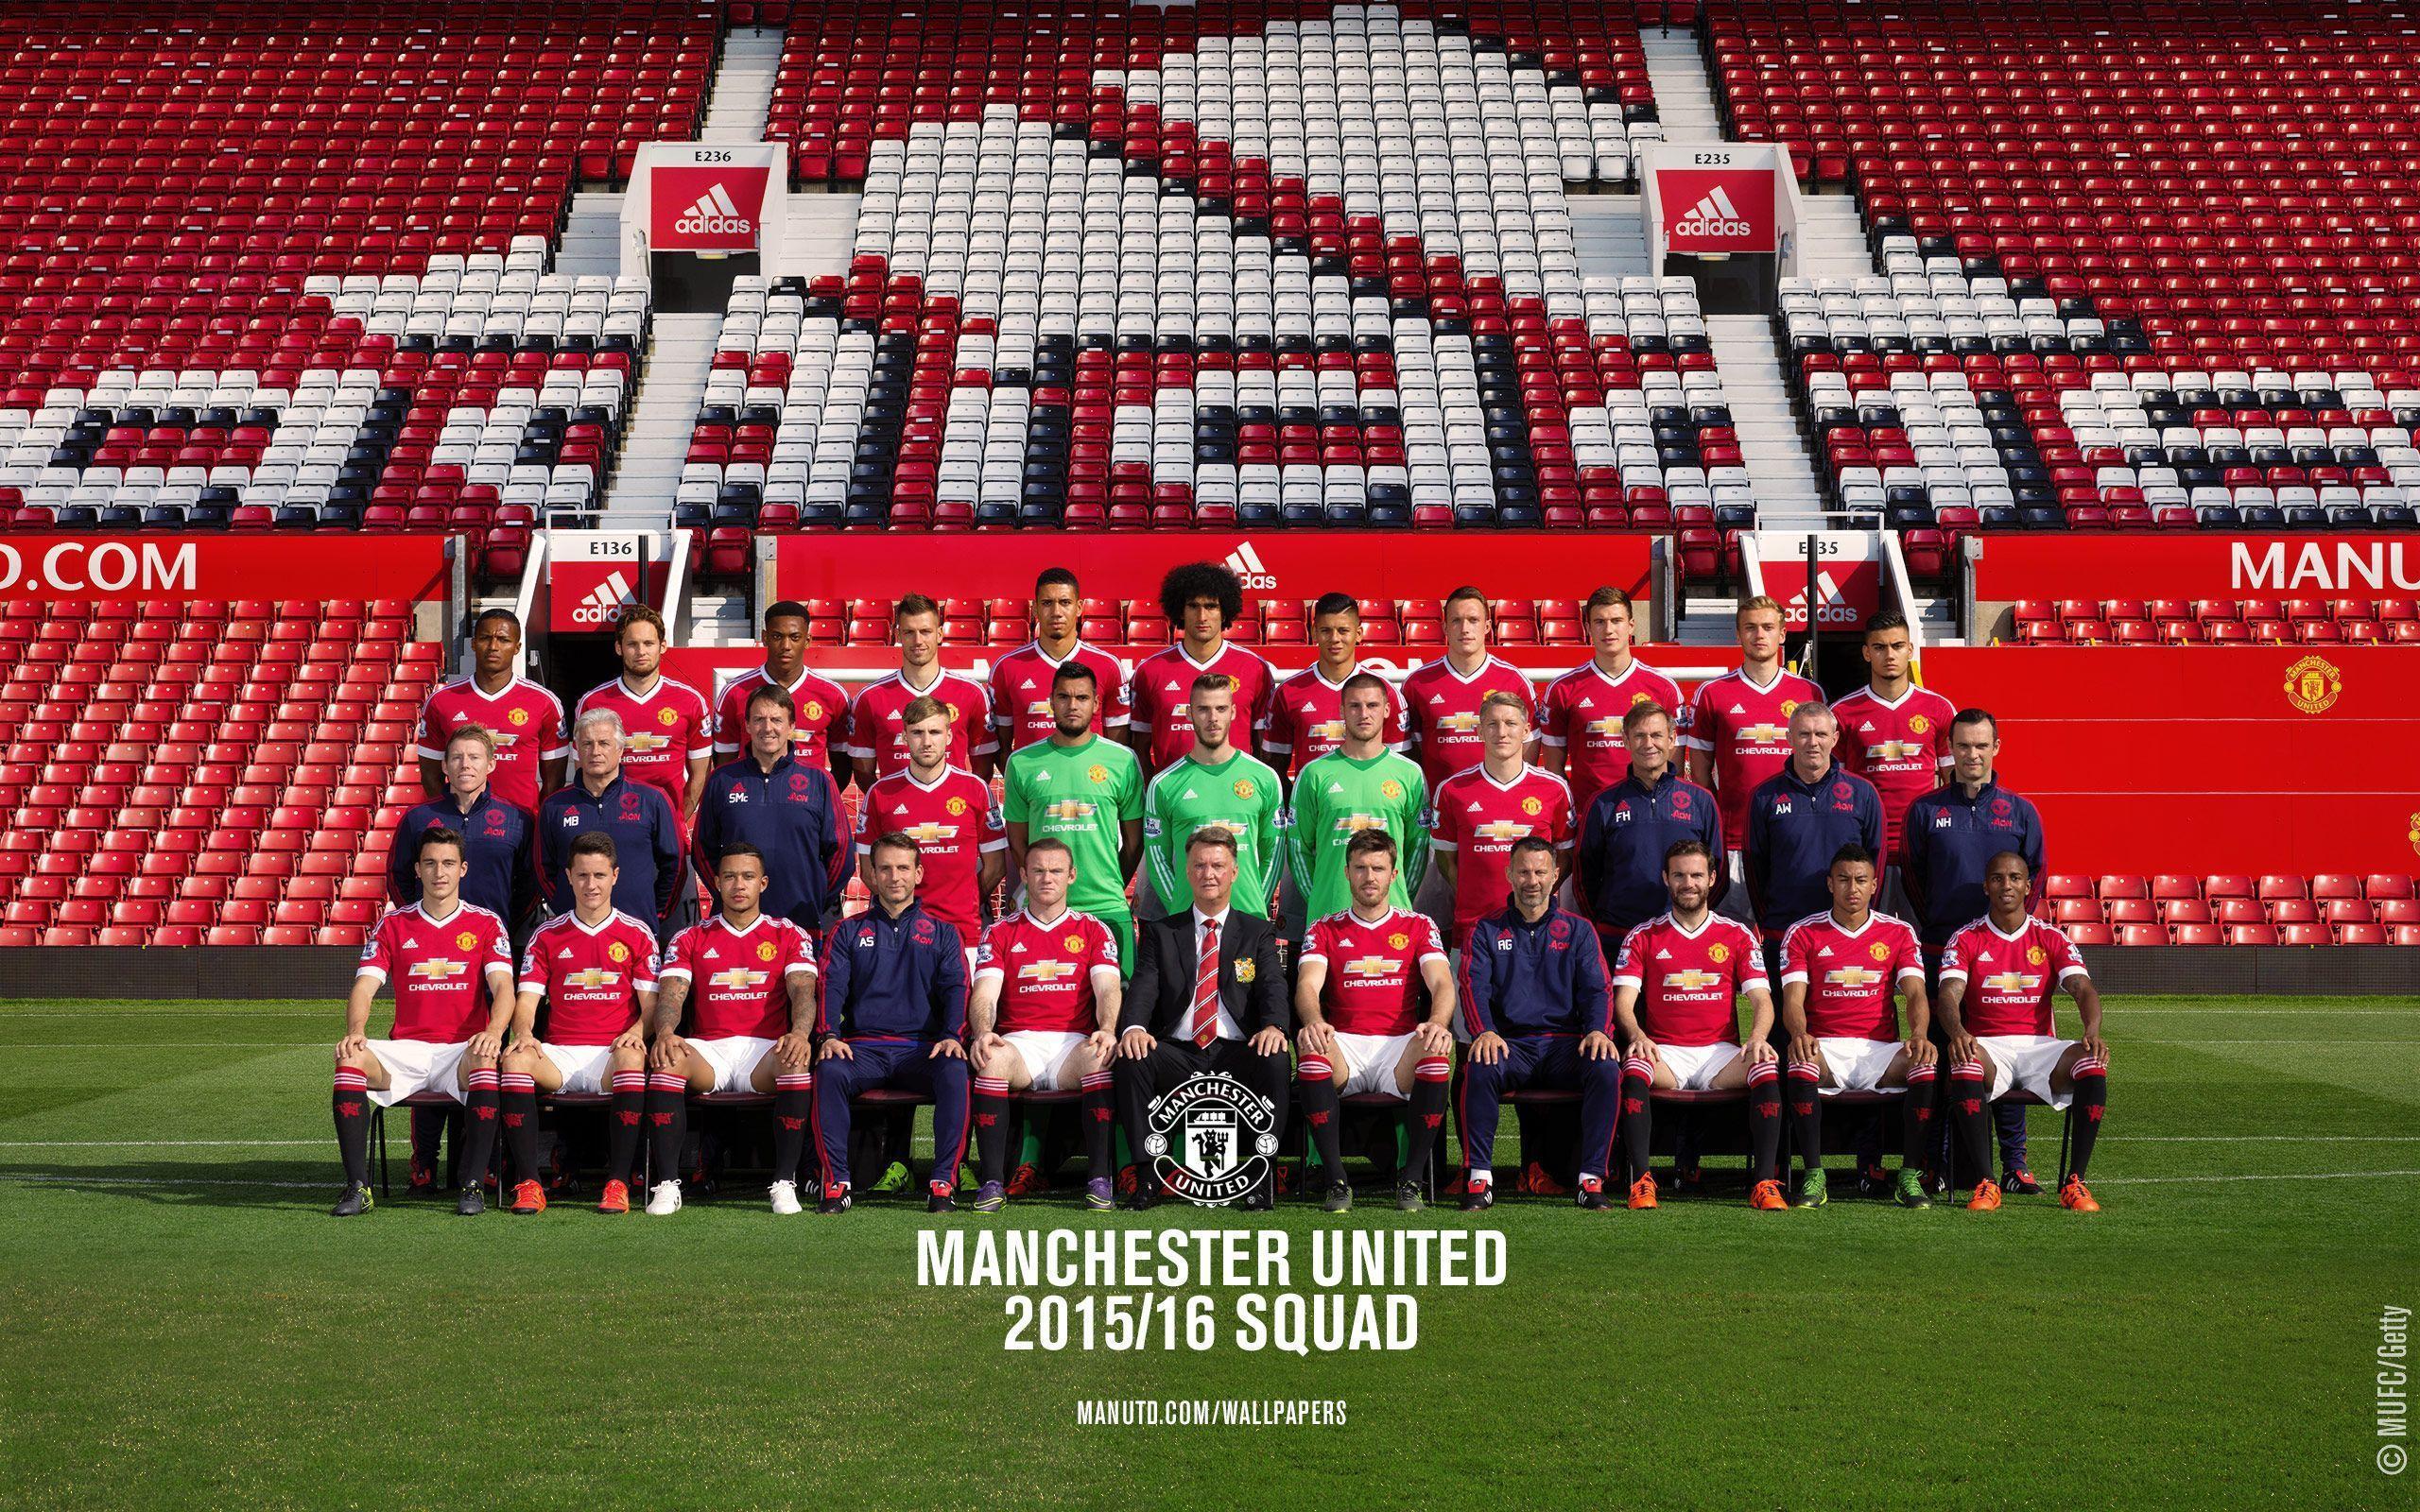 Manchester United 2015